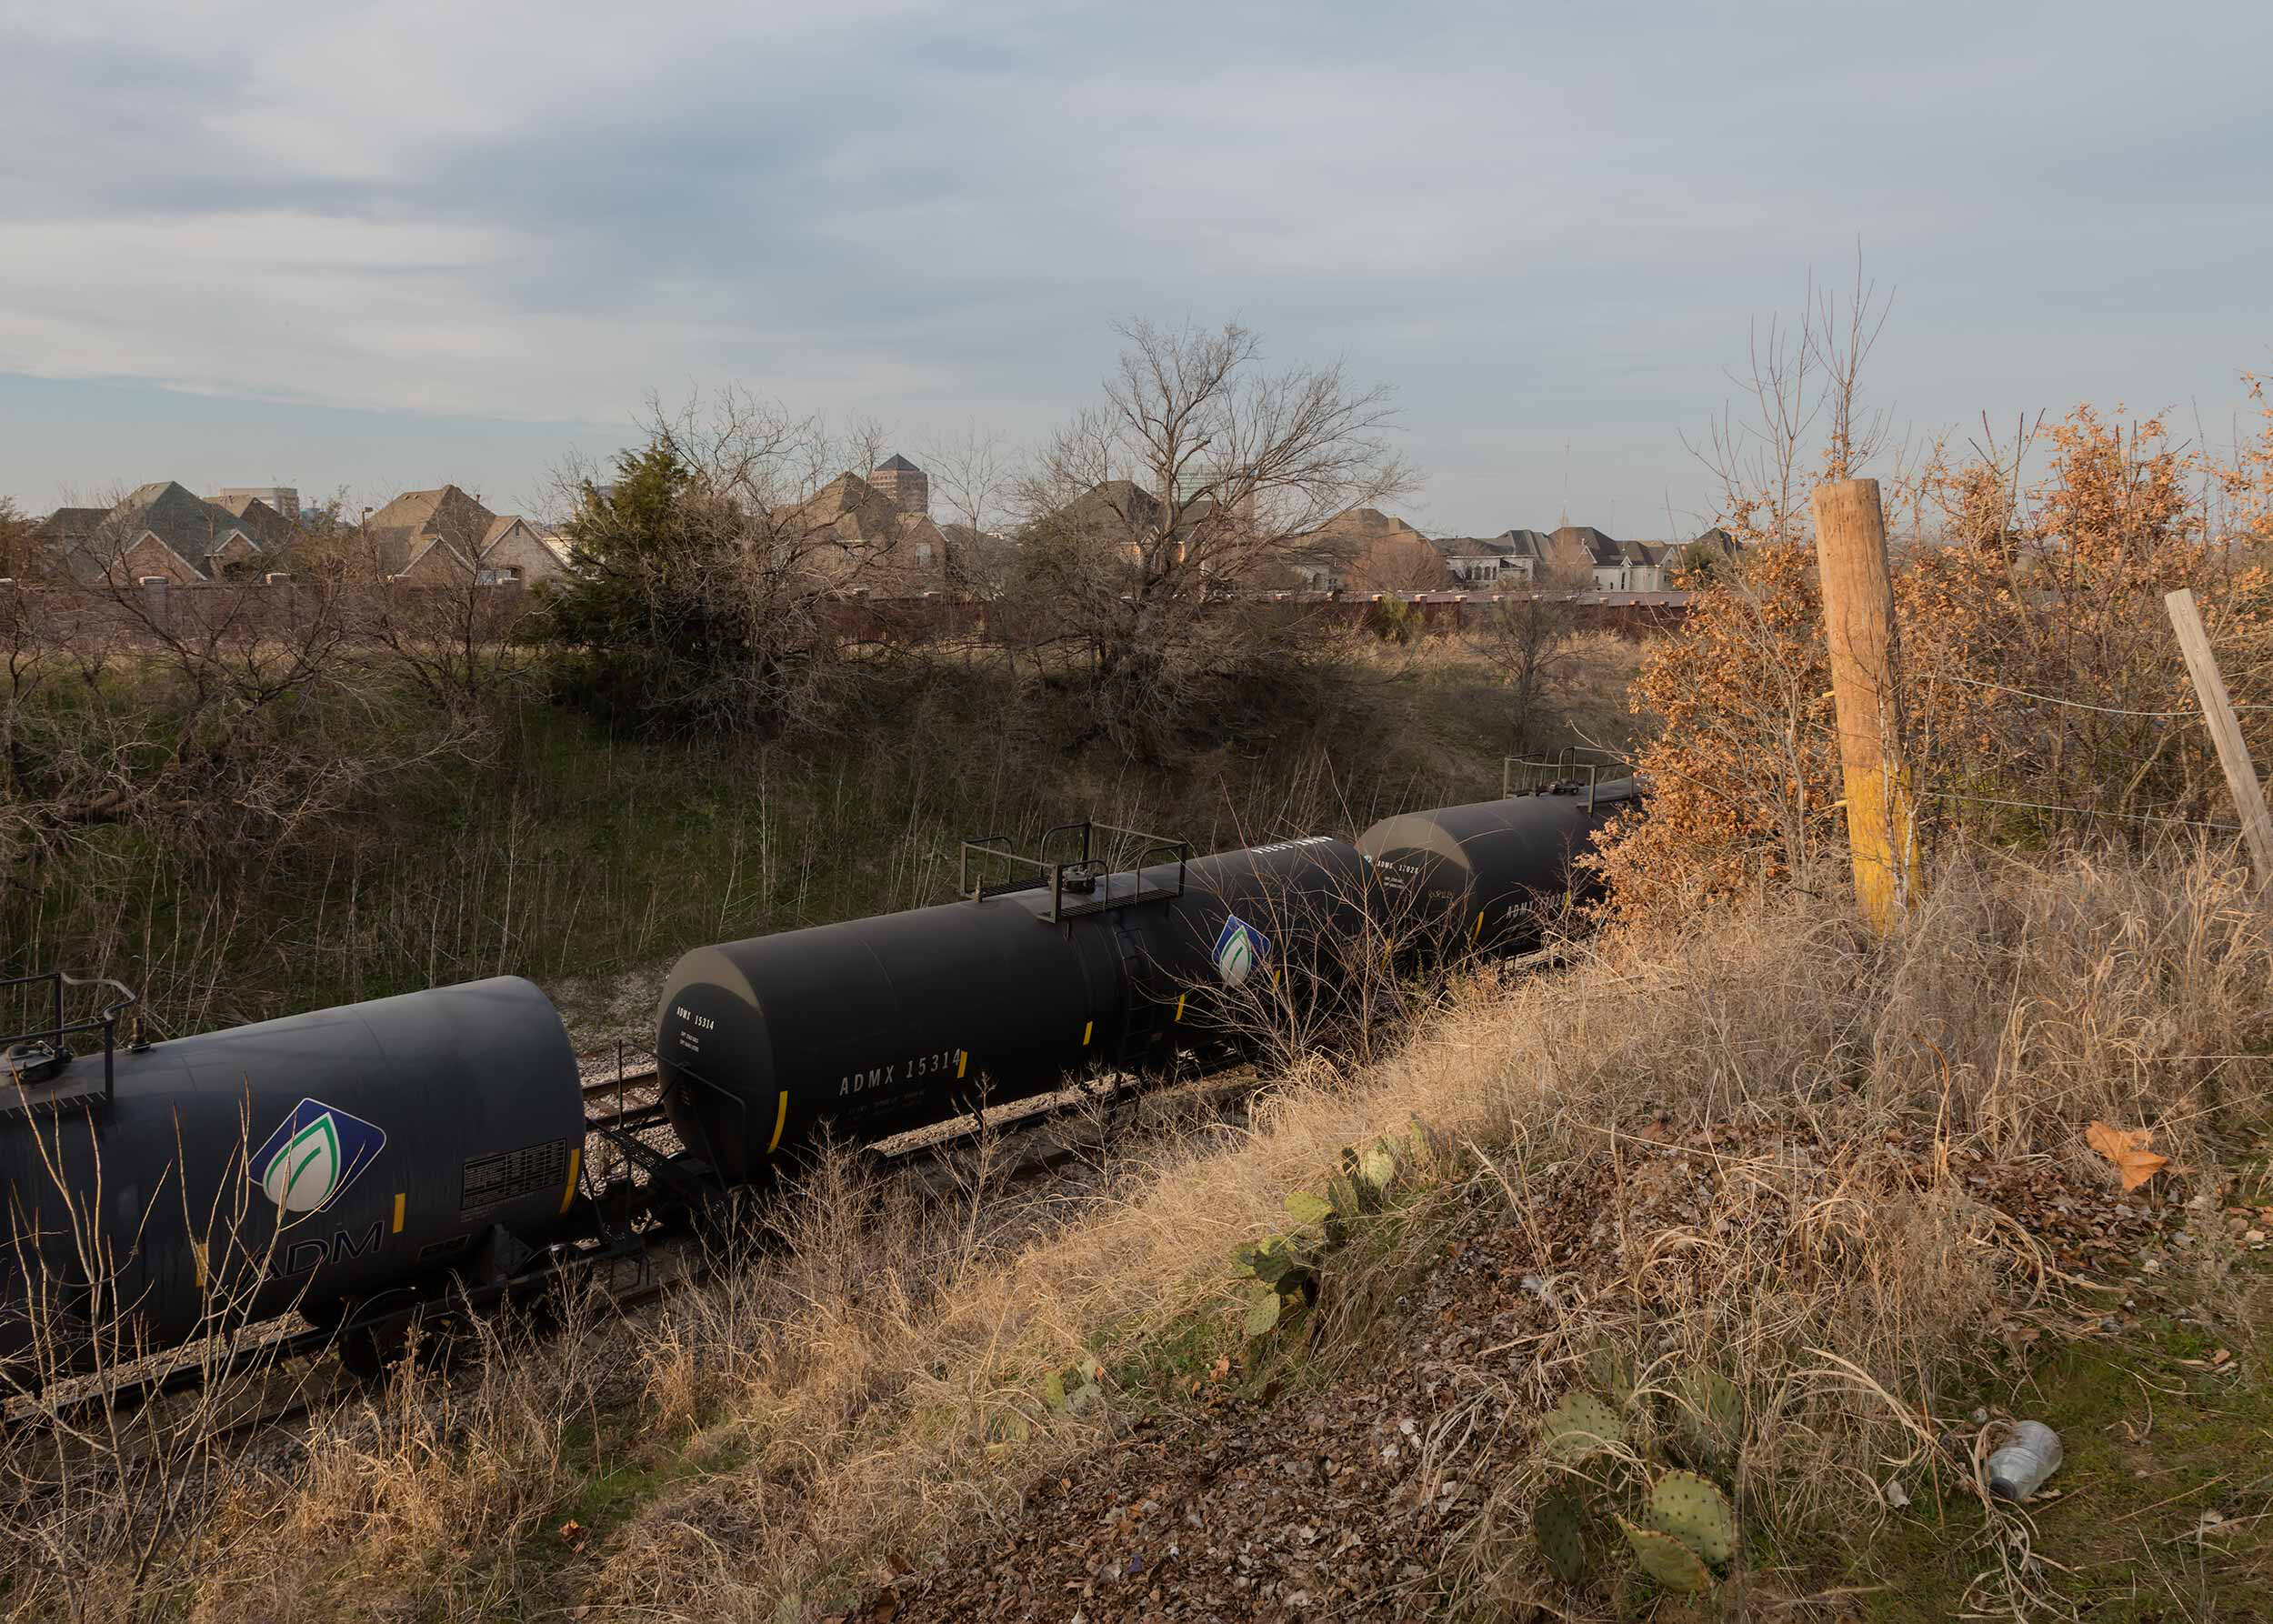 Tank Cars Parked On Top of a 12-inch High Pressure Explorer Pipeline Company's Storage Facility